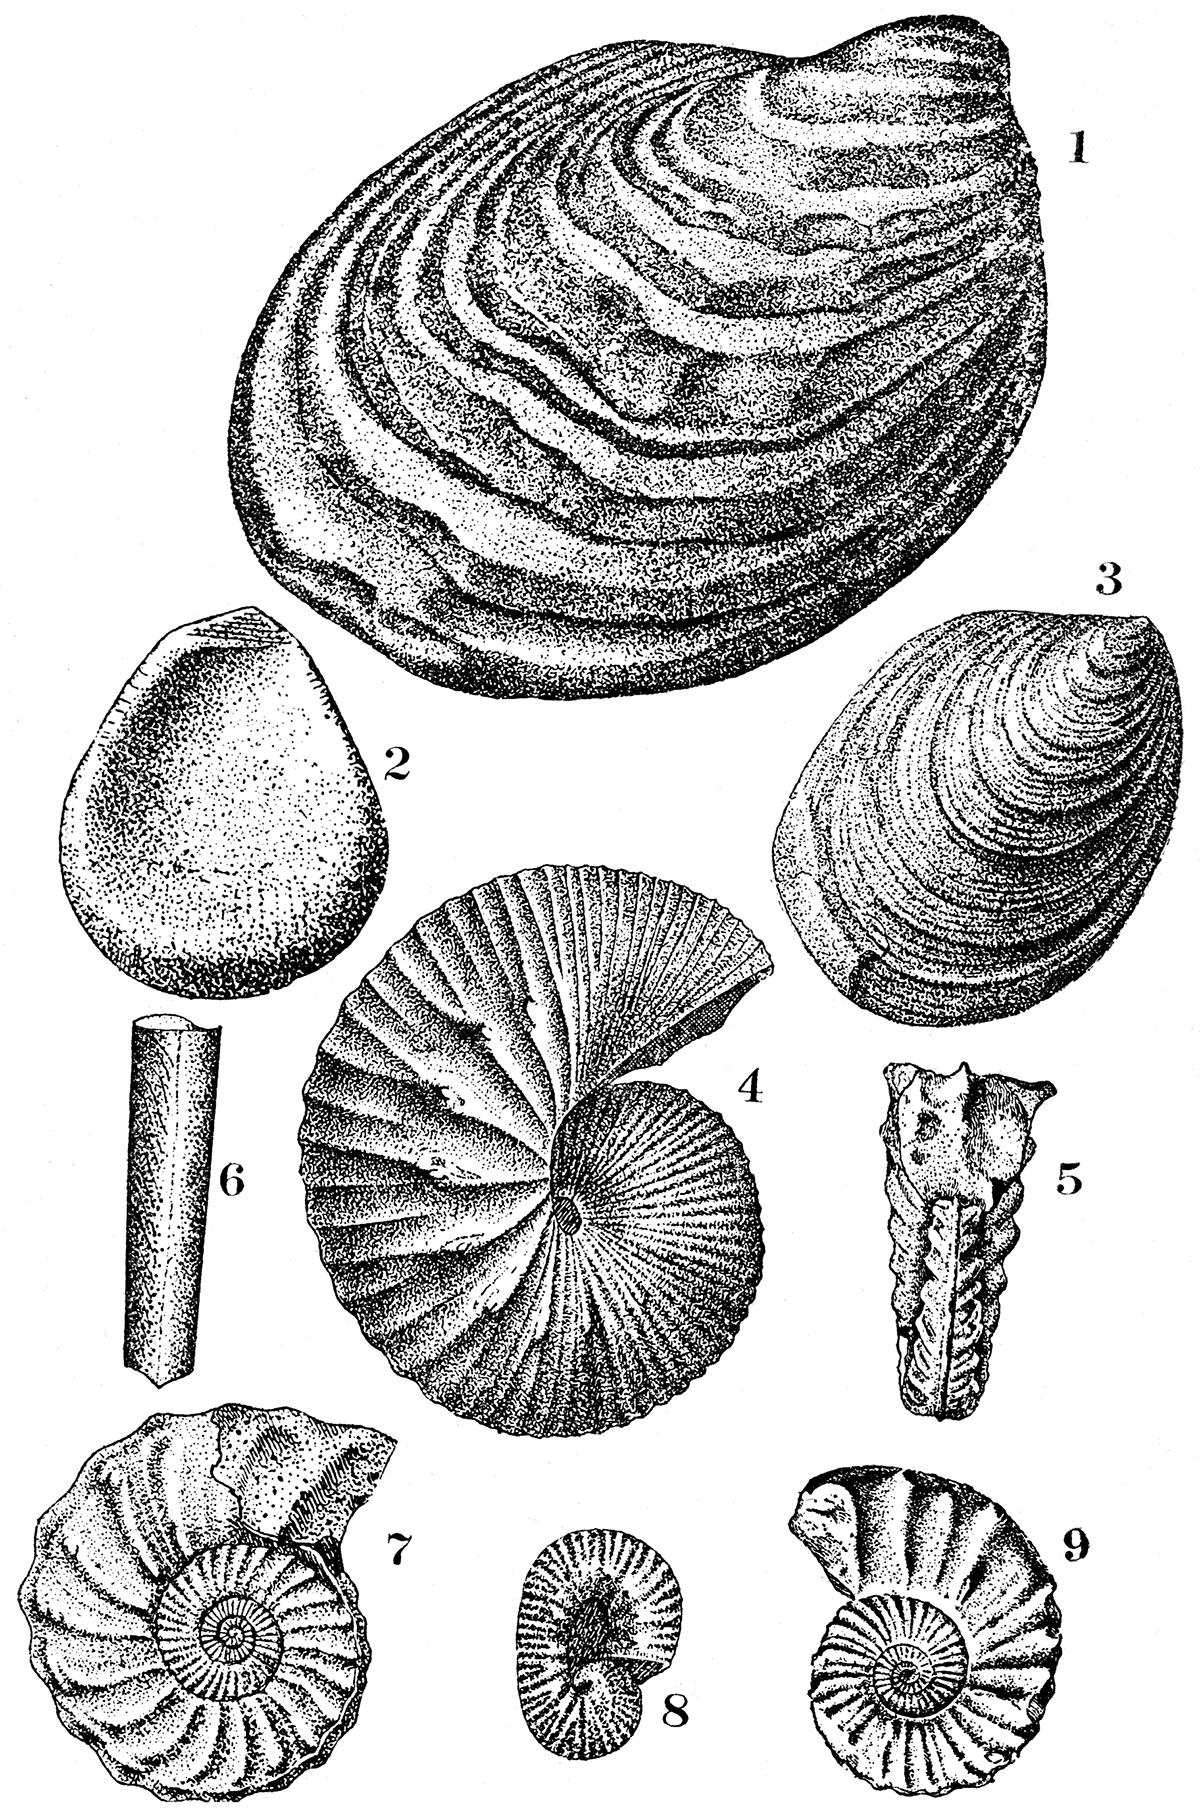 Typical fossils from the Cretaceous.